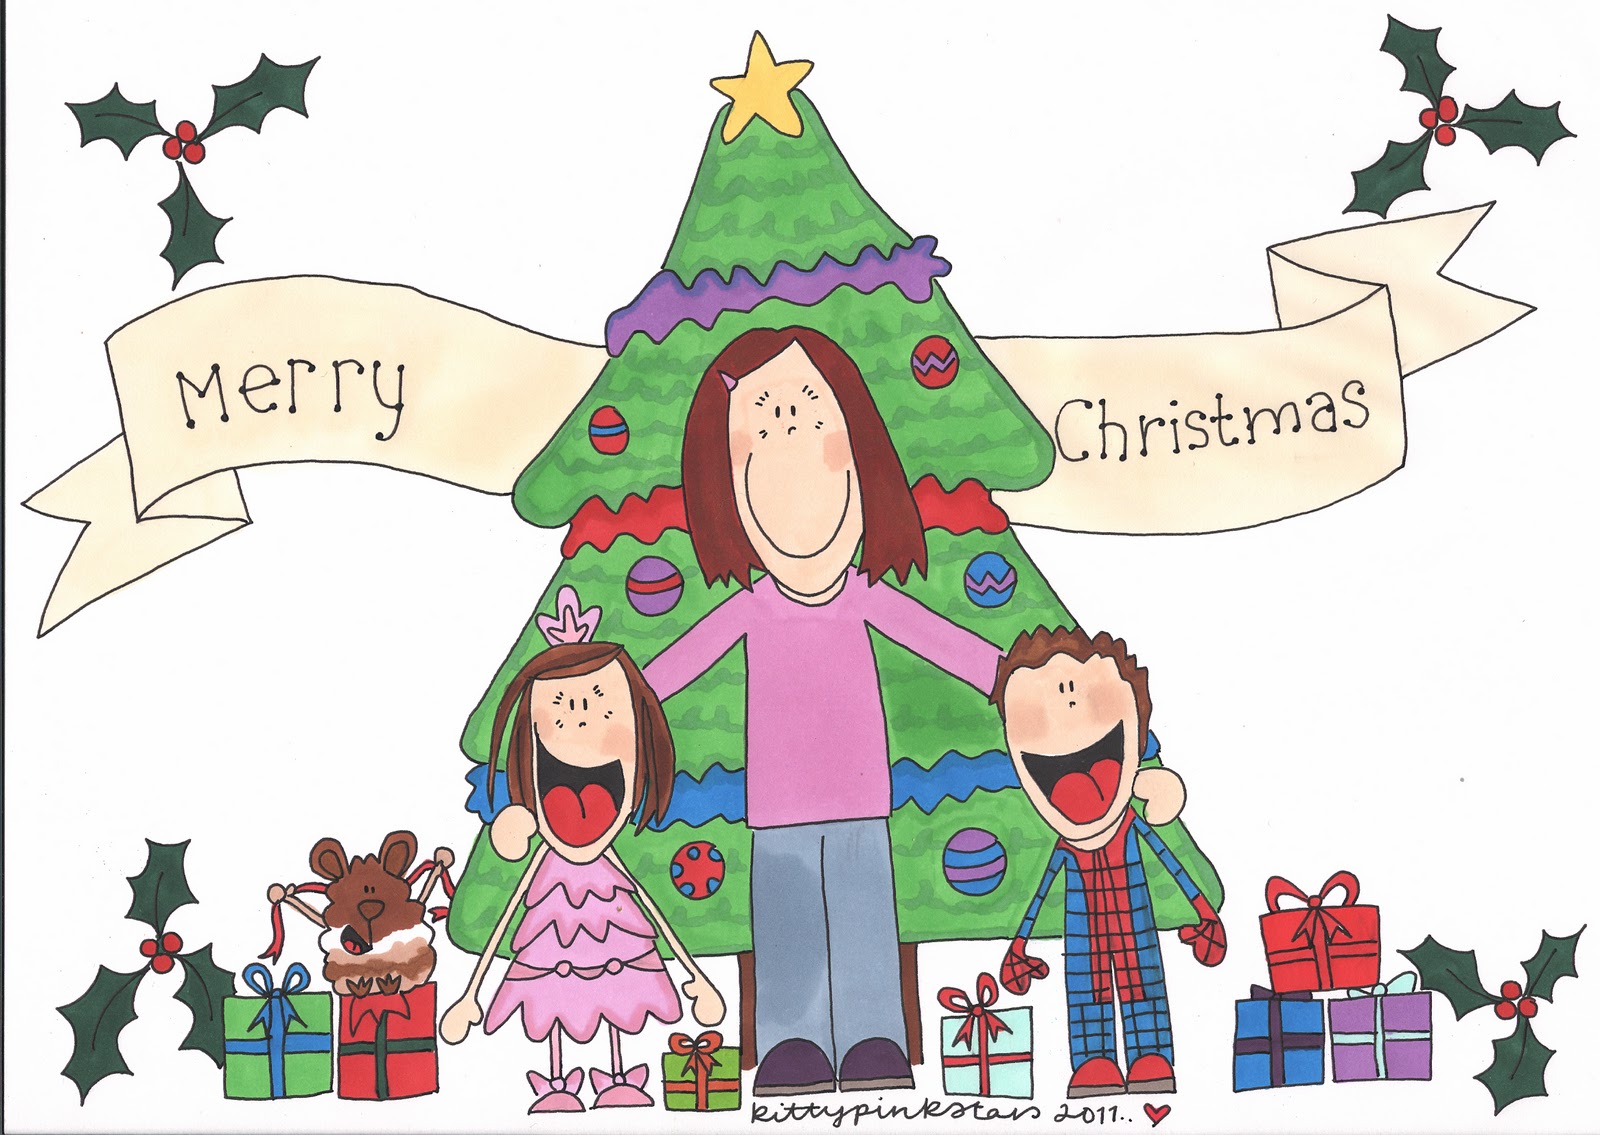 Christmas Pictures To Colour